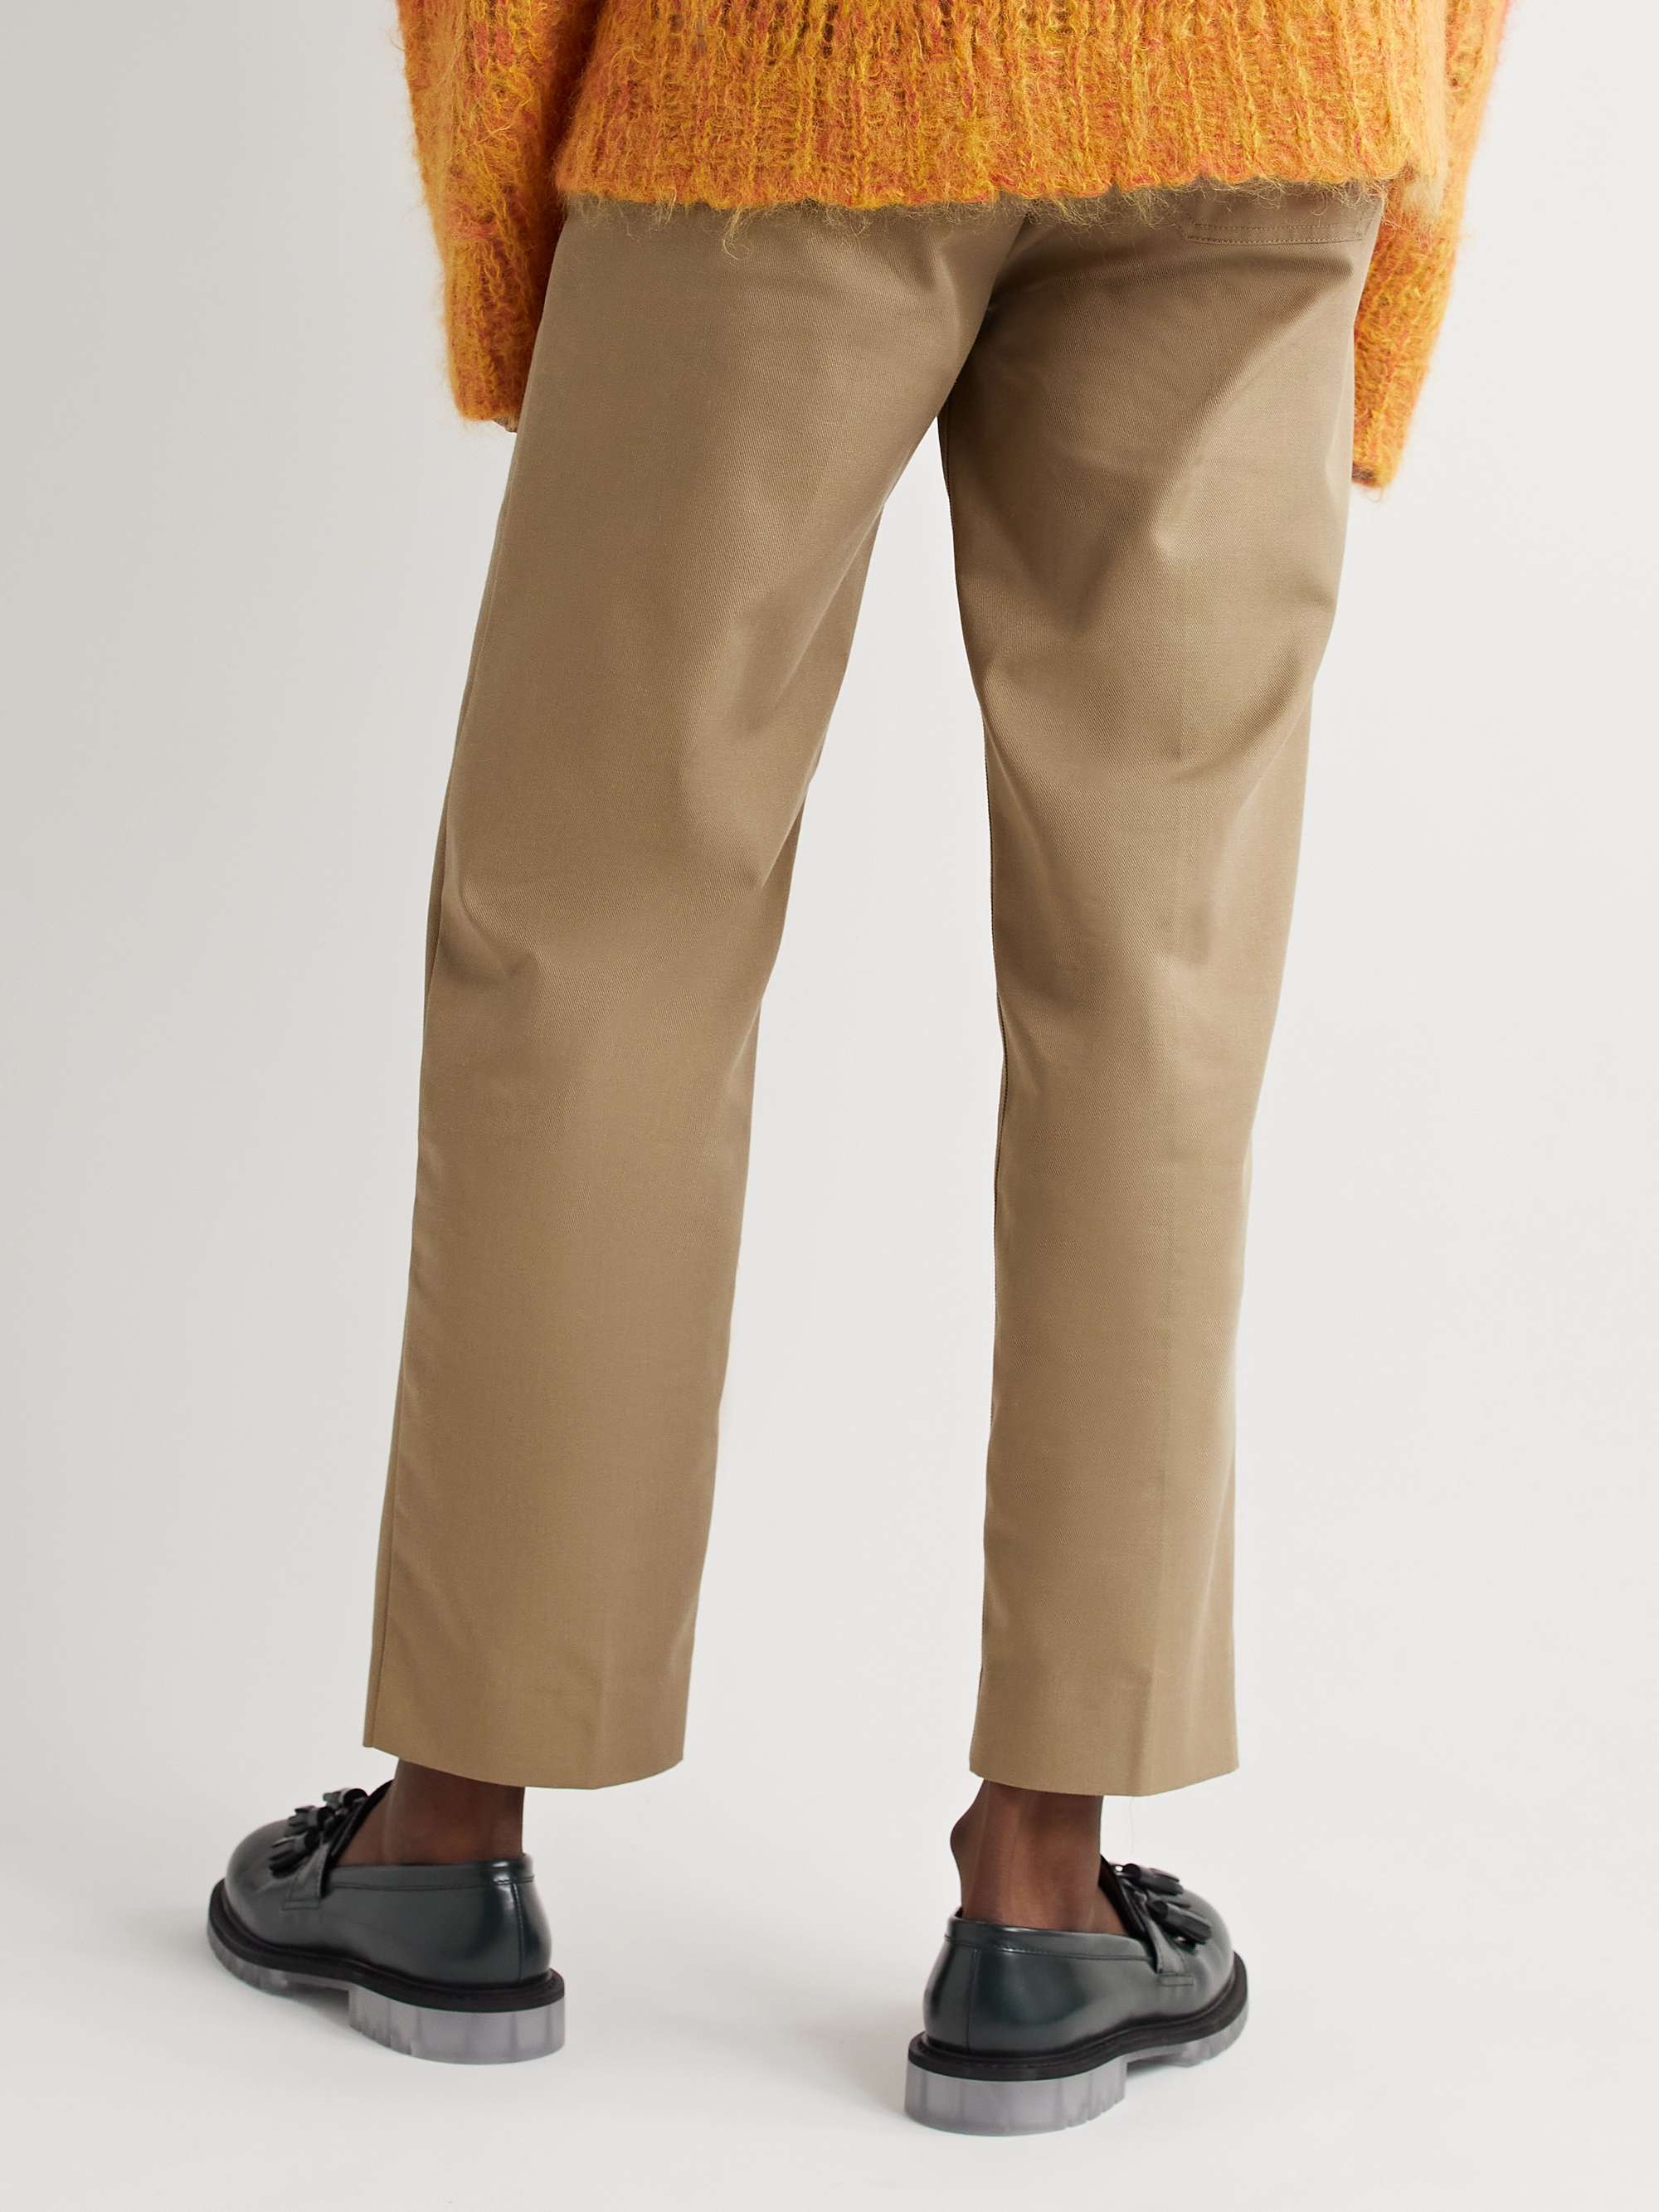 ACNE STUDIOS Ayonne Slim-Fit Cotton-Blend Twill Chinos